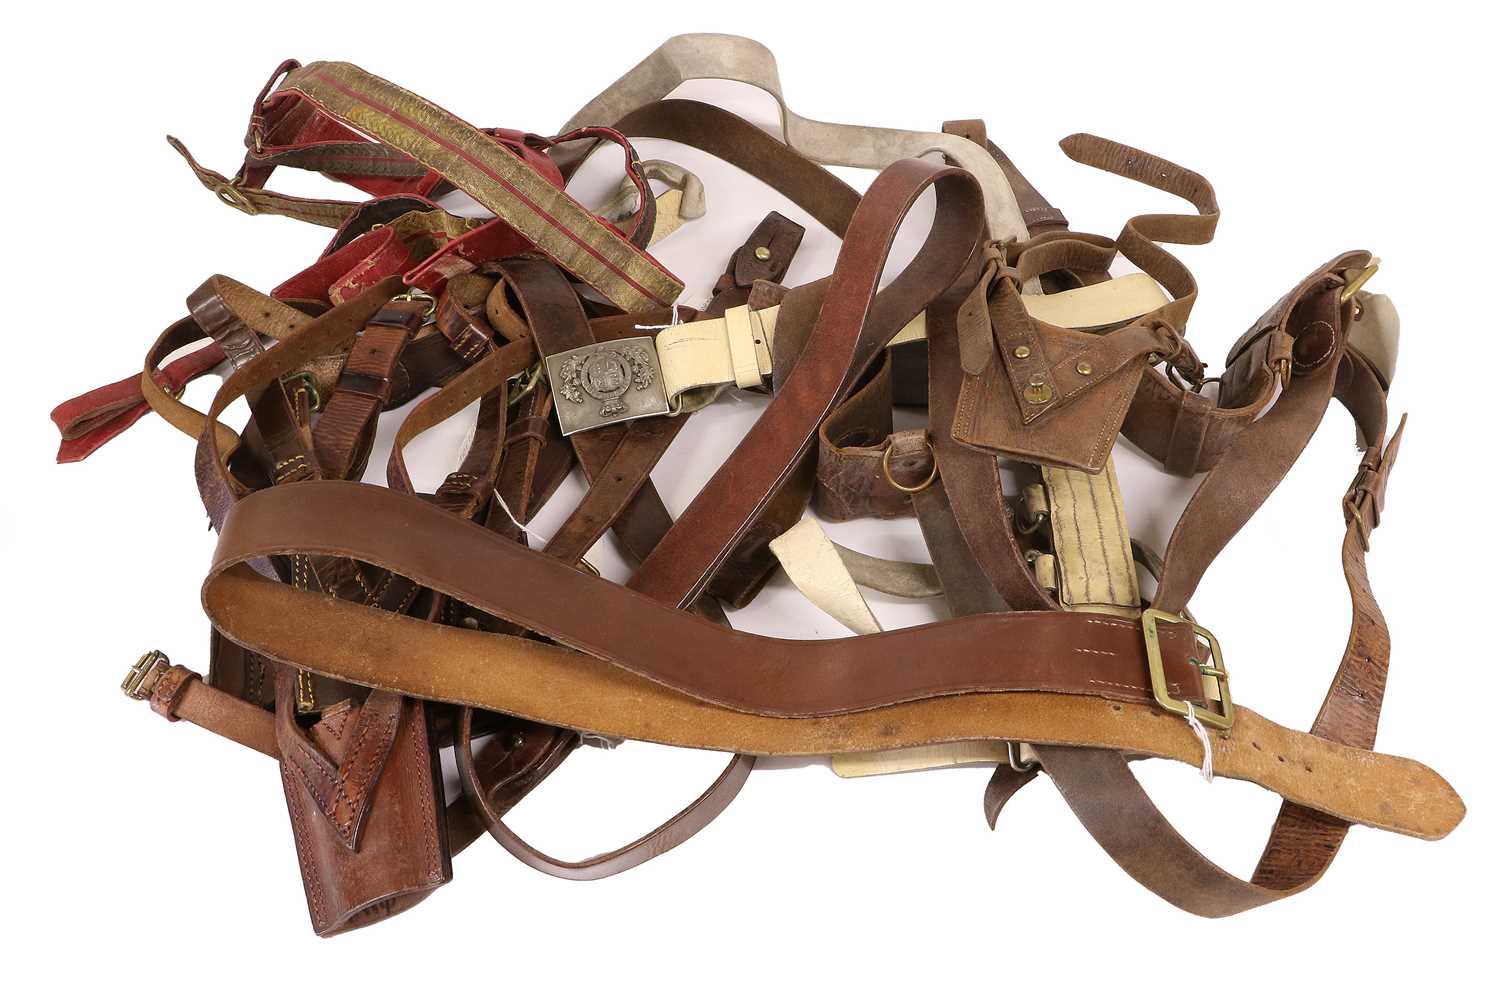 A Quantity of British Uniform Accessories, including Sam Browne belts, sword slings, leather straps, - Image 10 of 11